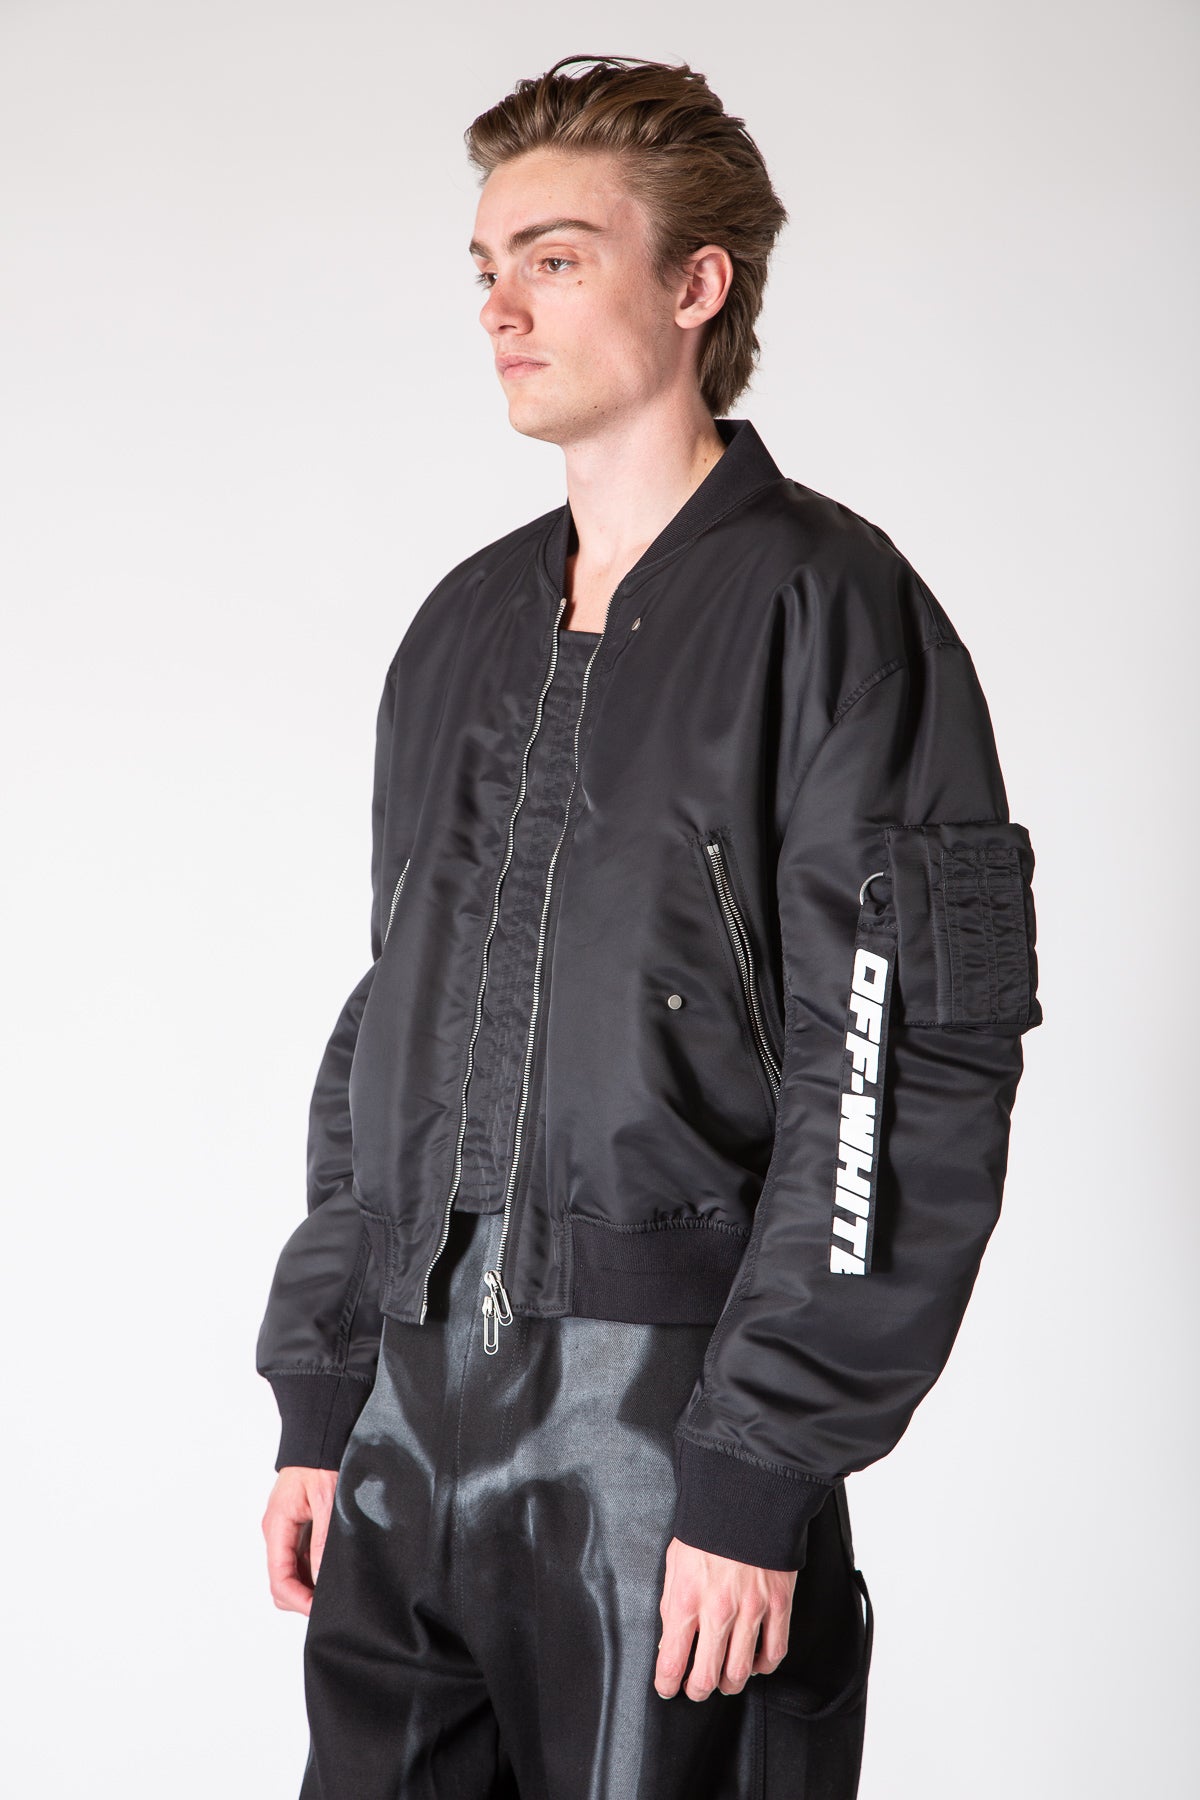 OFF-WHITE | INDUSTRIAL BOMBER JACKET